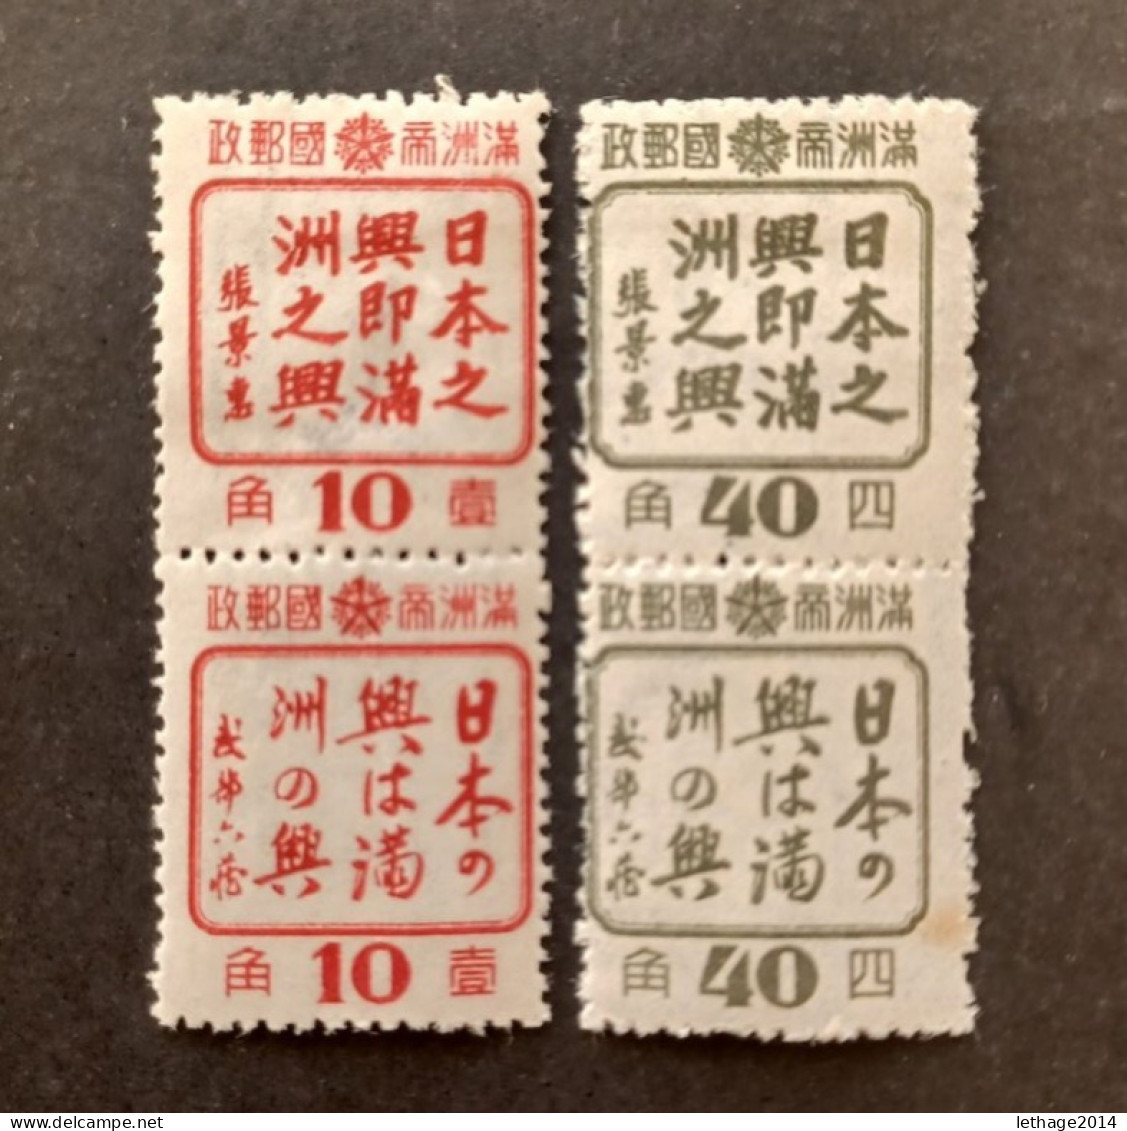 CINA CHINA 中國 1943 Friendship Between The Peoples Of Manchuria And Japan WRITING IN JAPANESE AND CHINESE MNH VERY RARE - 1932-45  Mandschurei (Mandschukuo)